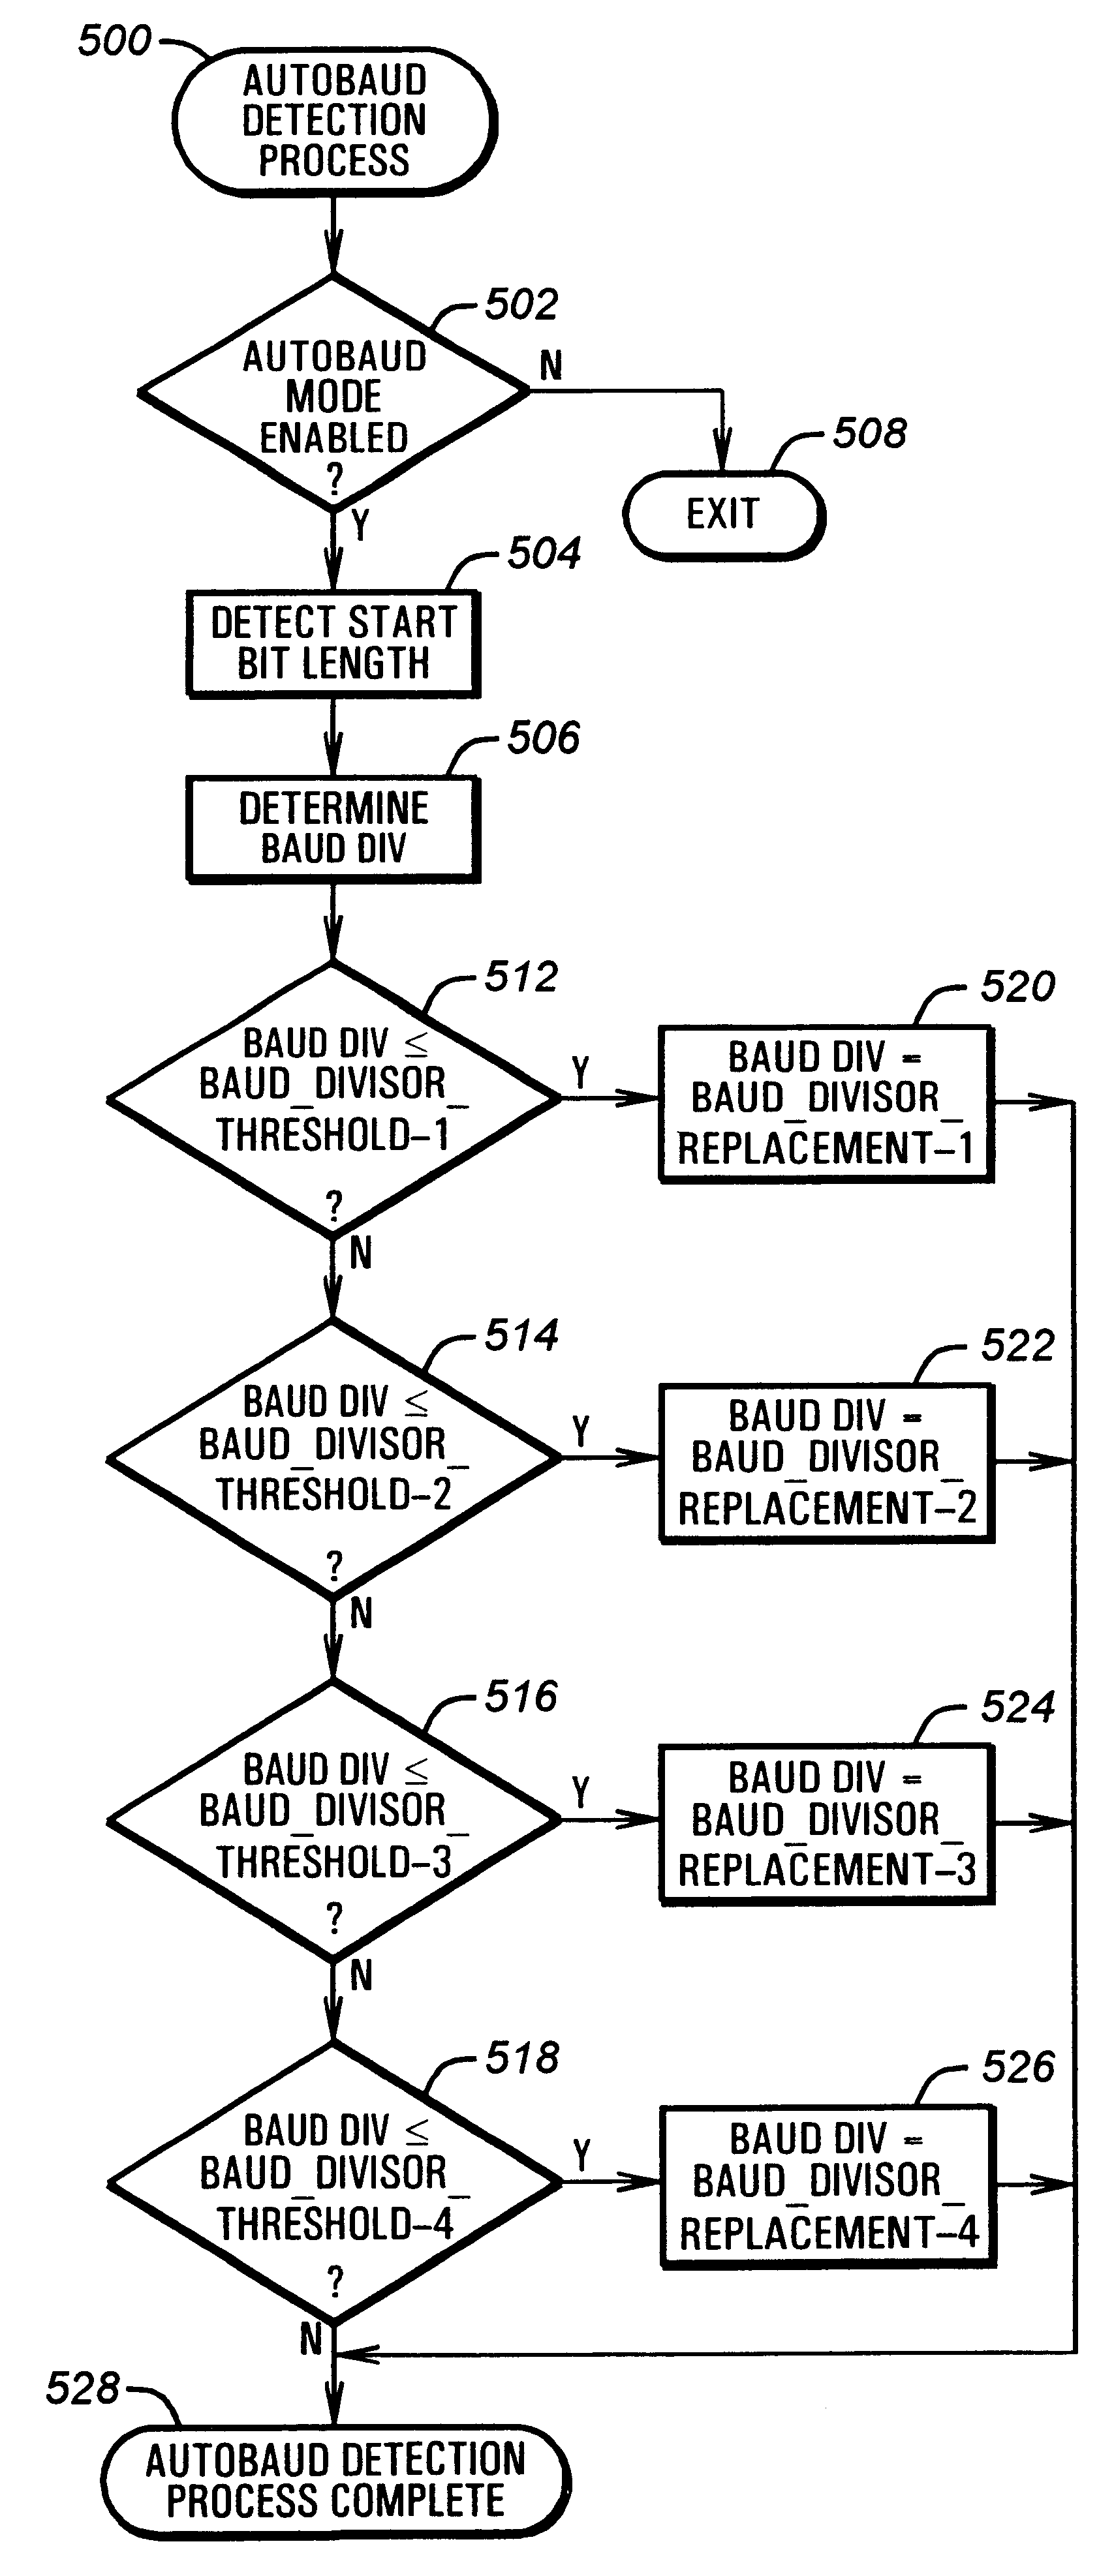 Autobauding with adjustment to a programmable baud rate